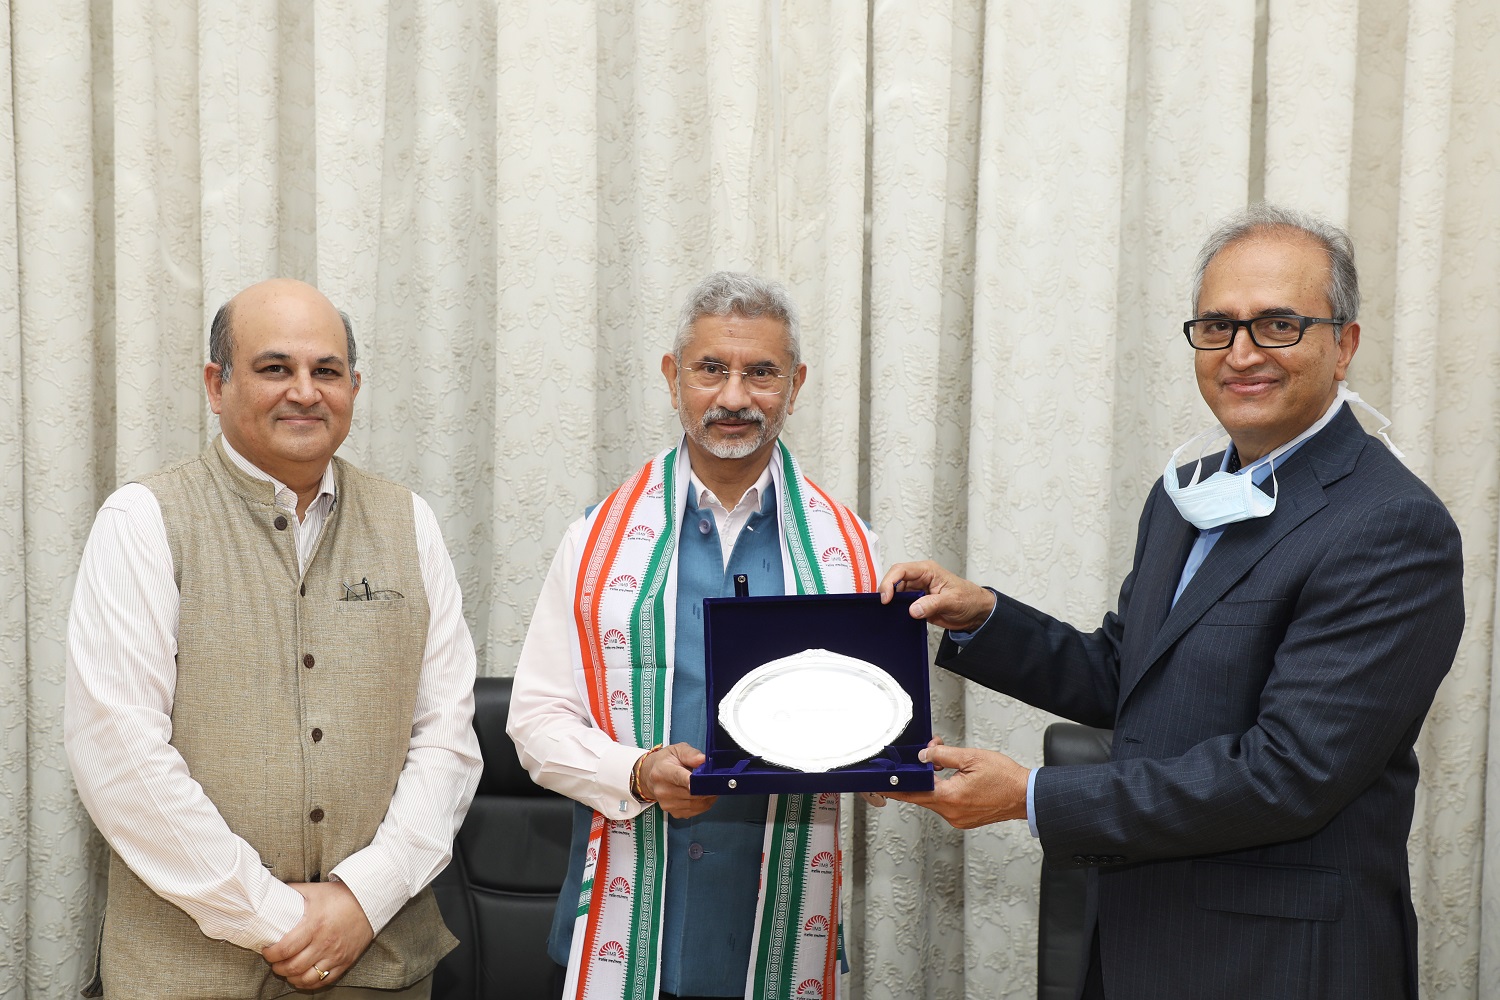 Dr. Devi Prasad Shetty, Chairperson, Board of Governors, IIM Bangalore, and Chairman, Narayana Group of Hospitals, Bengaluru, presents a memento to the External Affairs Minister, Dr. S. Jaishankar, during the latter’s visit to the IIMB campus on June 10, 2022. IIMB Director Professor Rishikesha T Krishnan looks on.